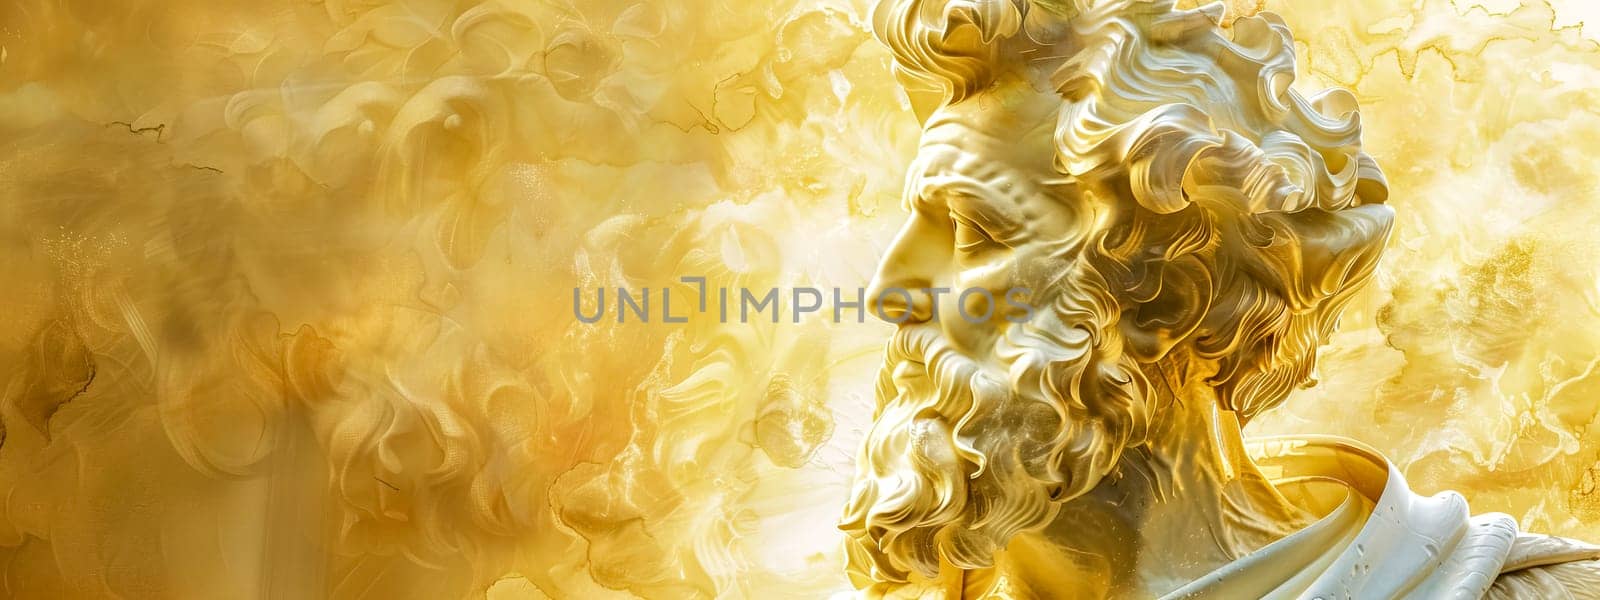 Elegant gold sculpture of a classical deity with intricate details against a dreamy, golden backdrop